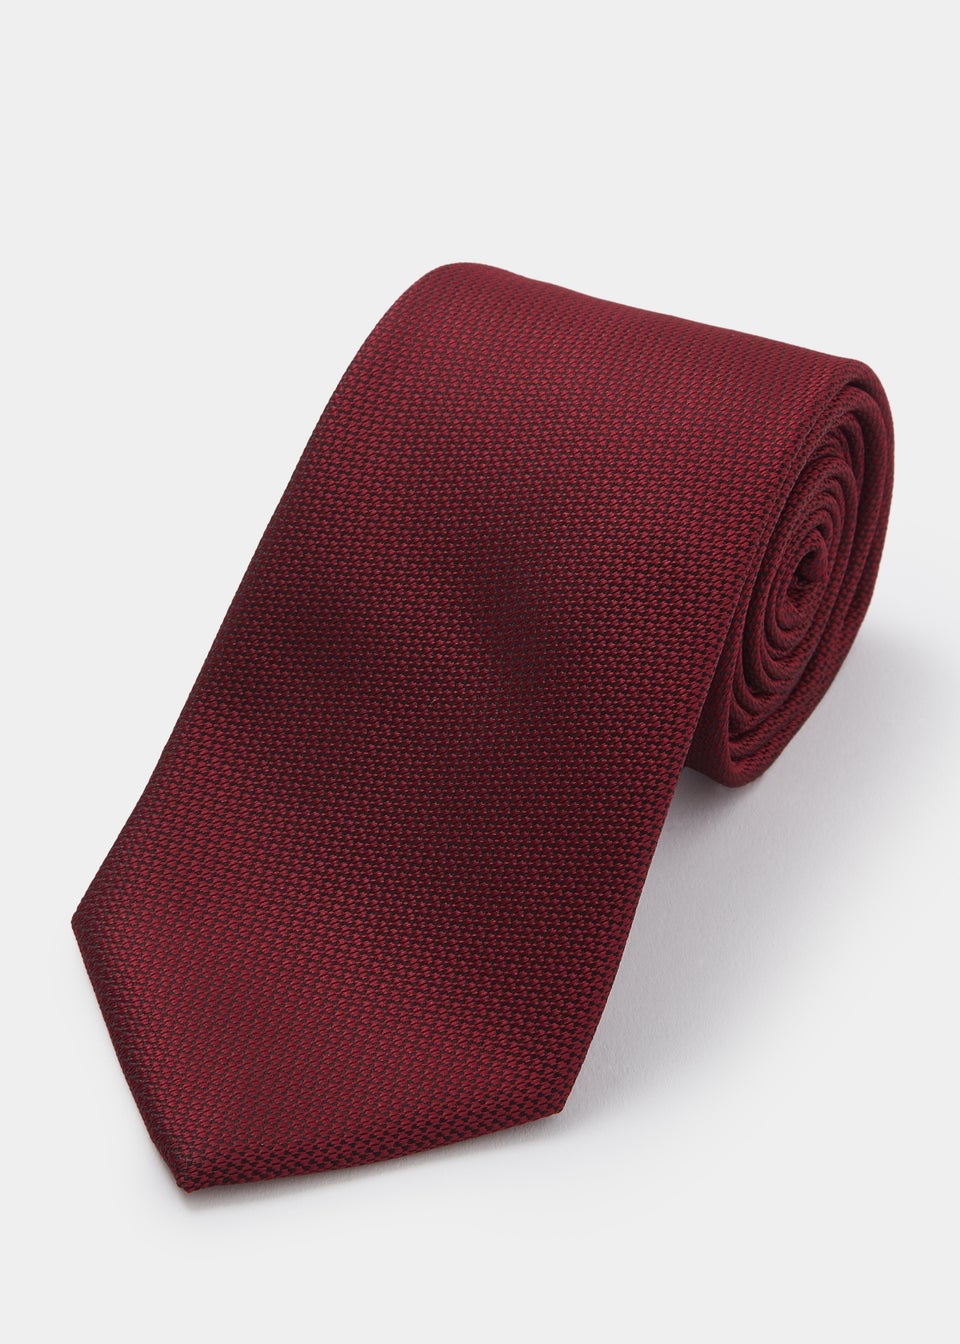 Taylor & Wright Red Plain Textured Tie